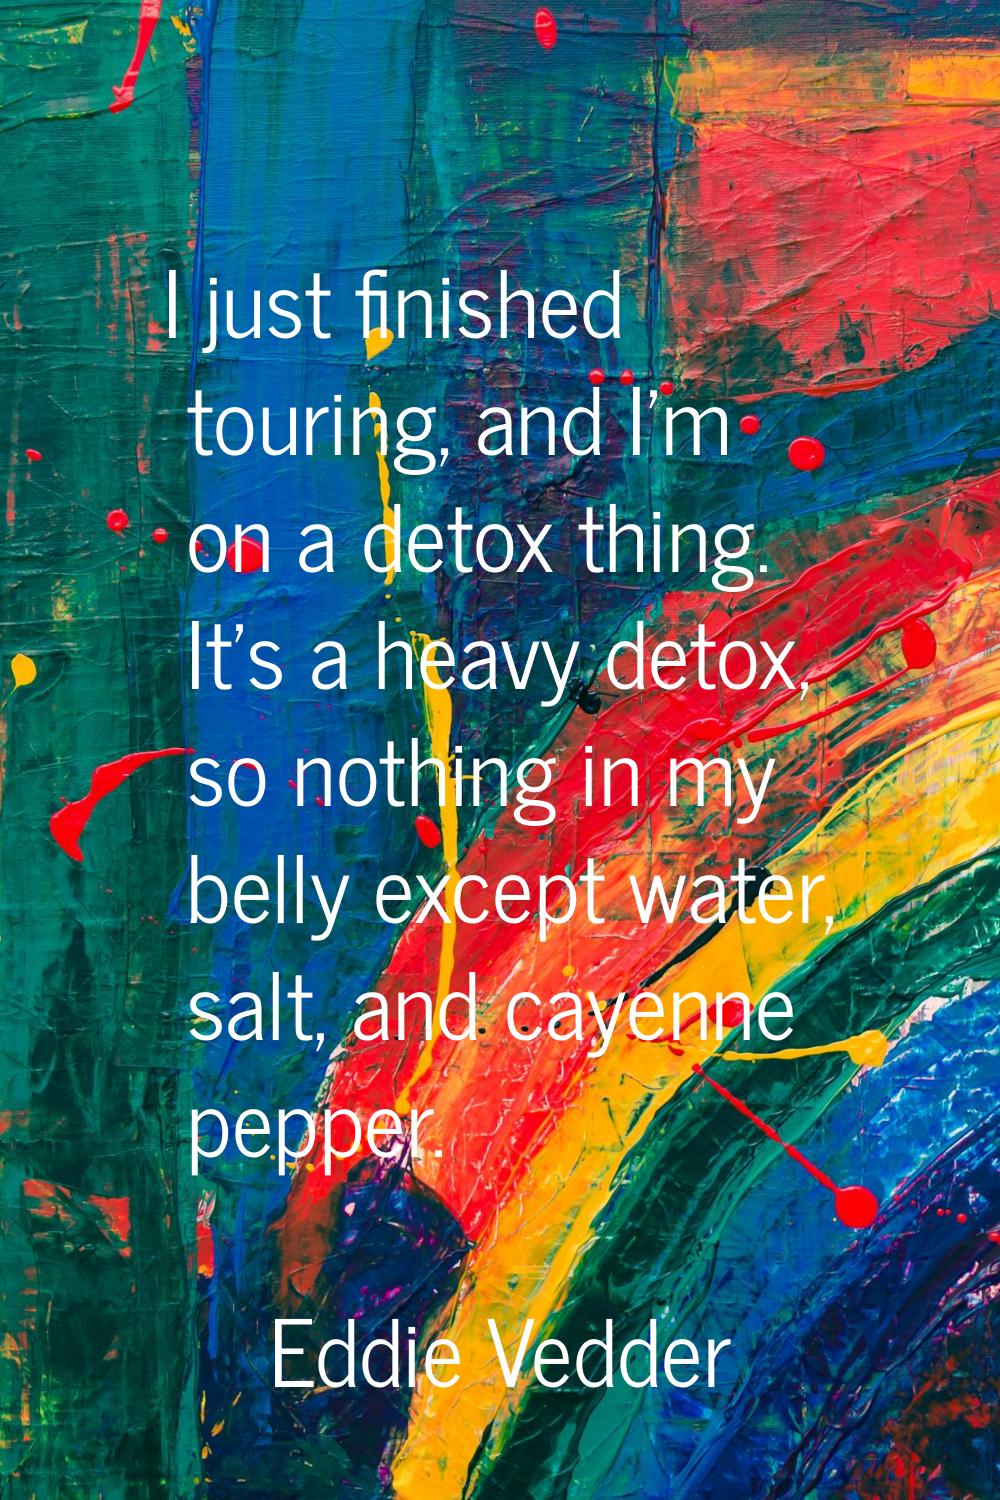 I just finished touring, and I'm on a detox thing. It's a heavy detox, so nothing in my belly excep